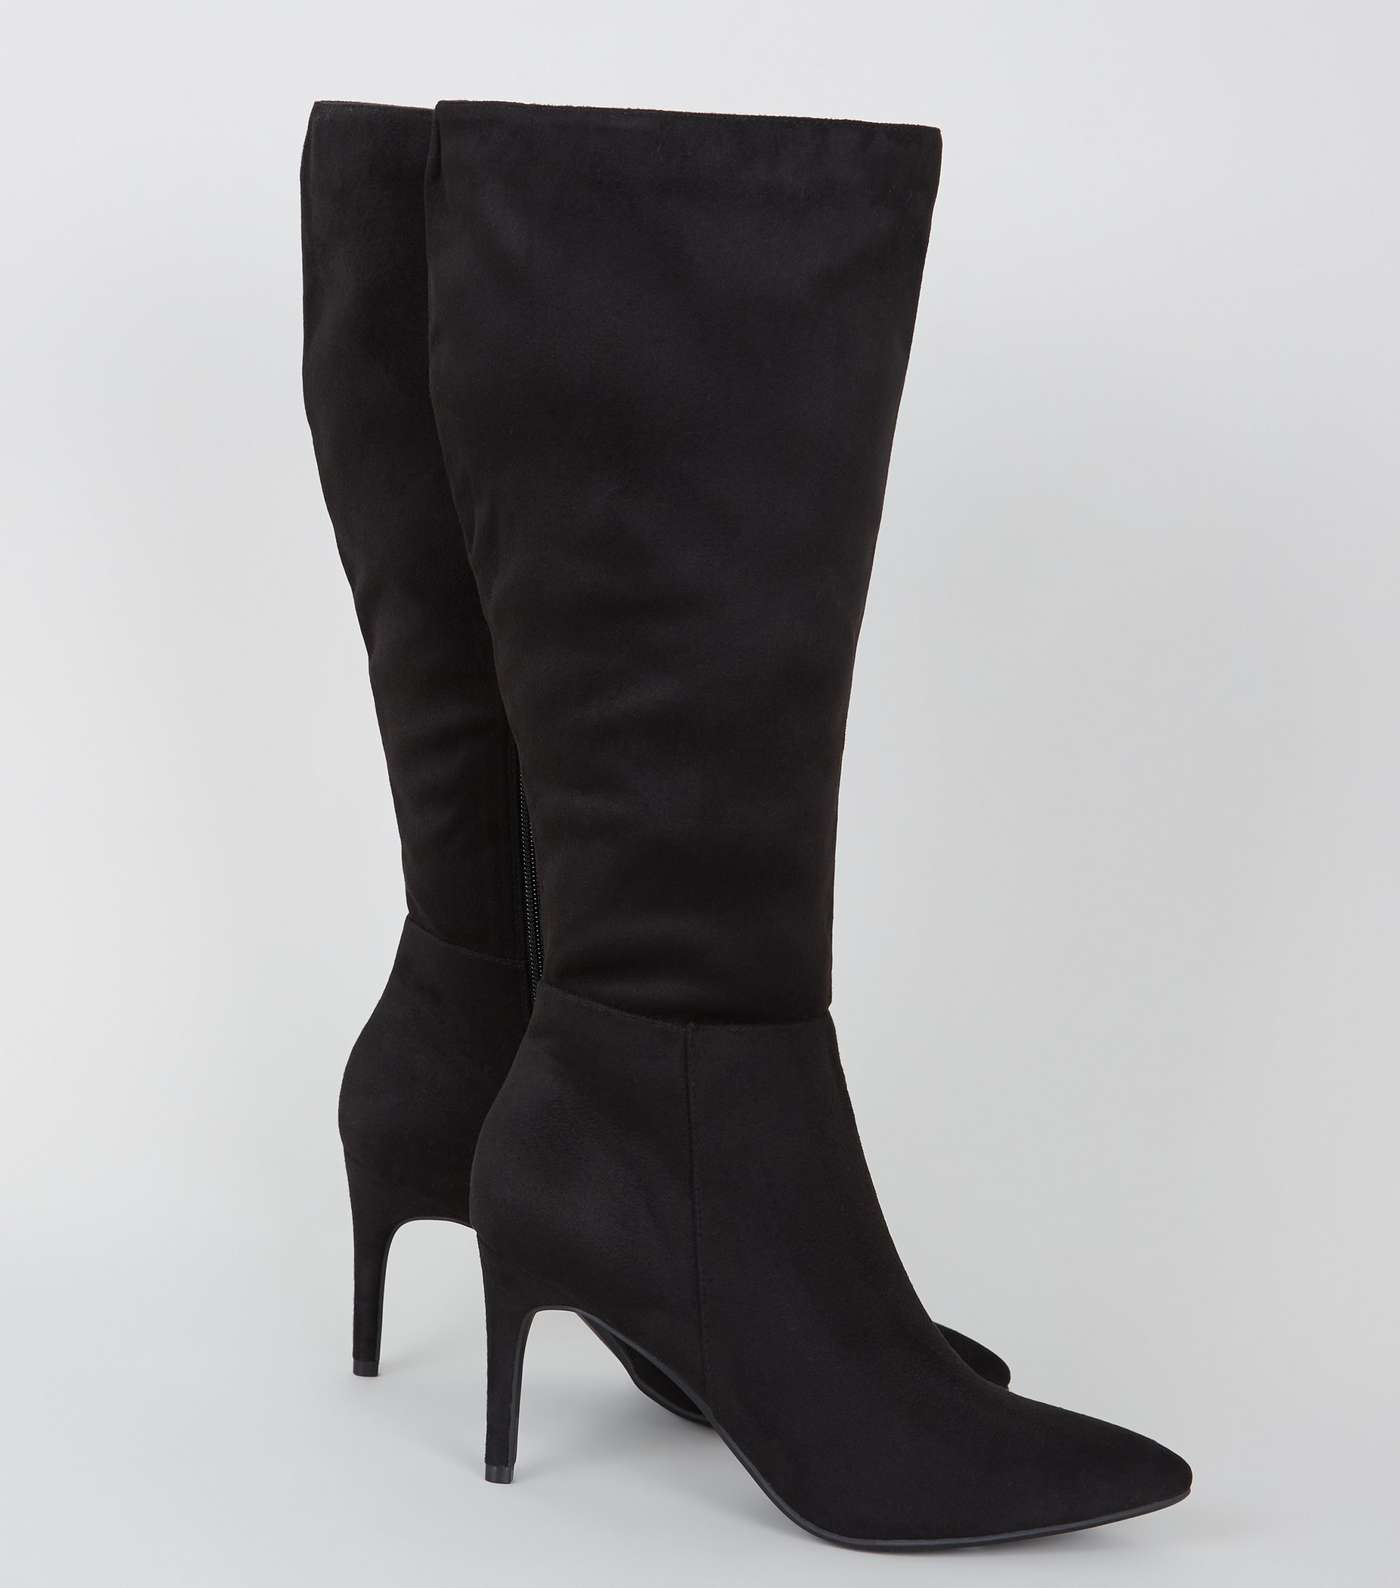 Black Suedette Pointed Stiletto Knee High Boots Image 3